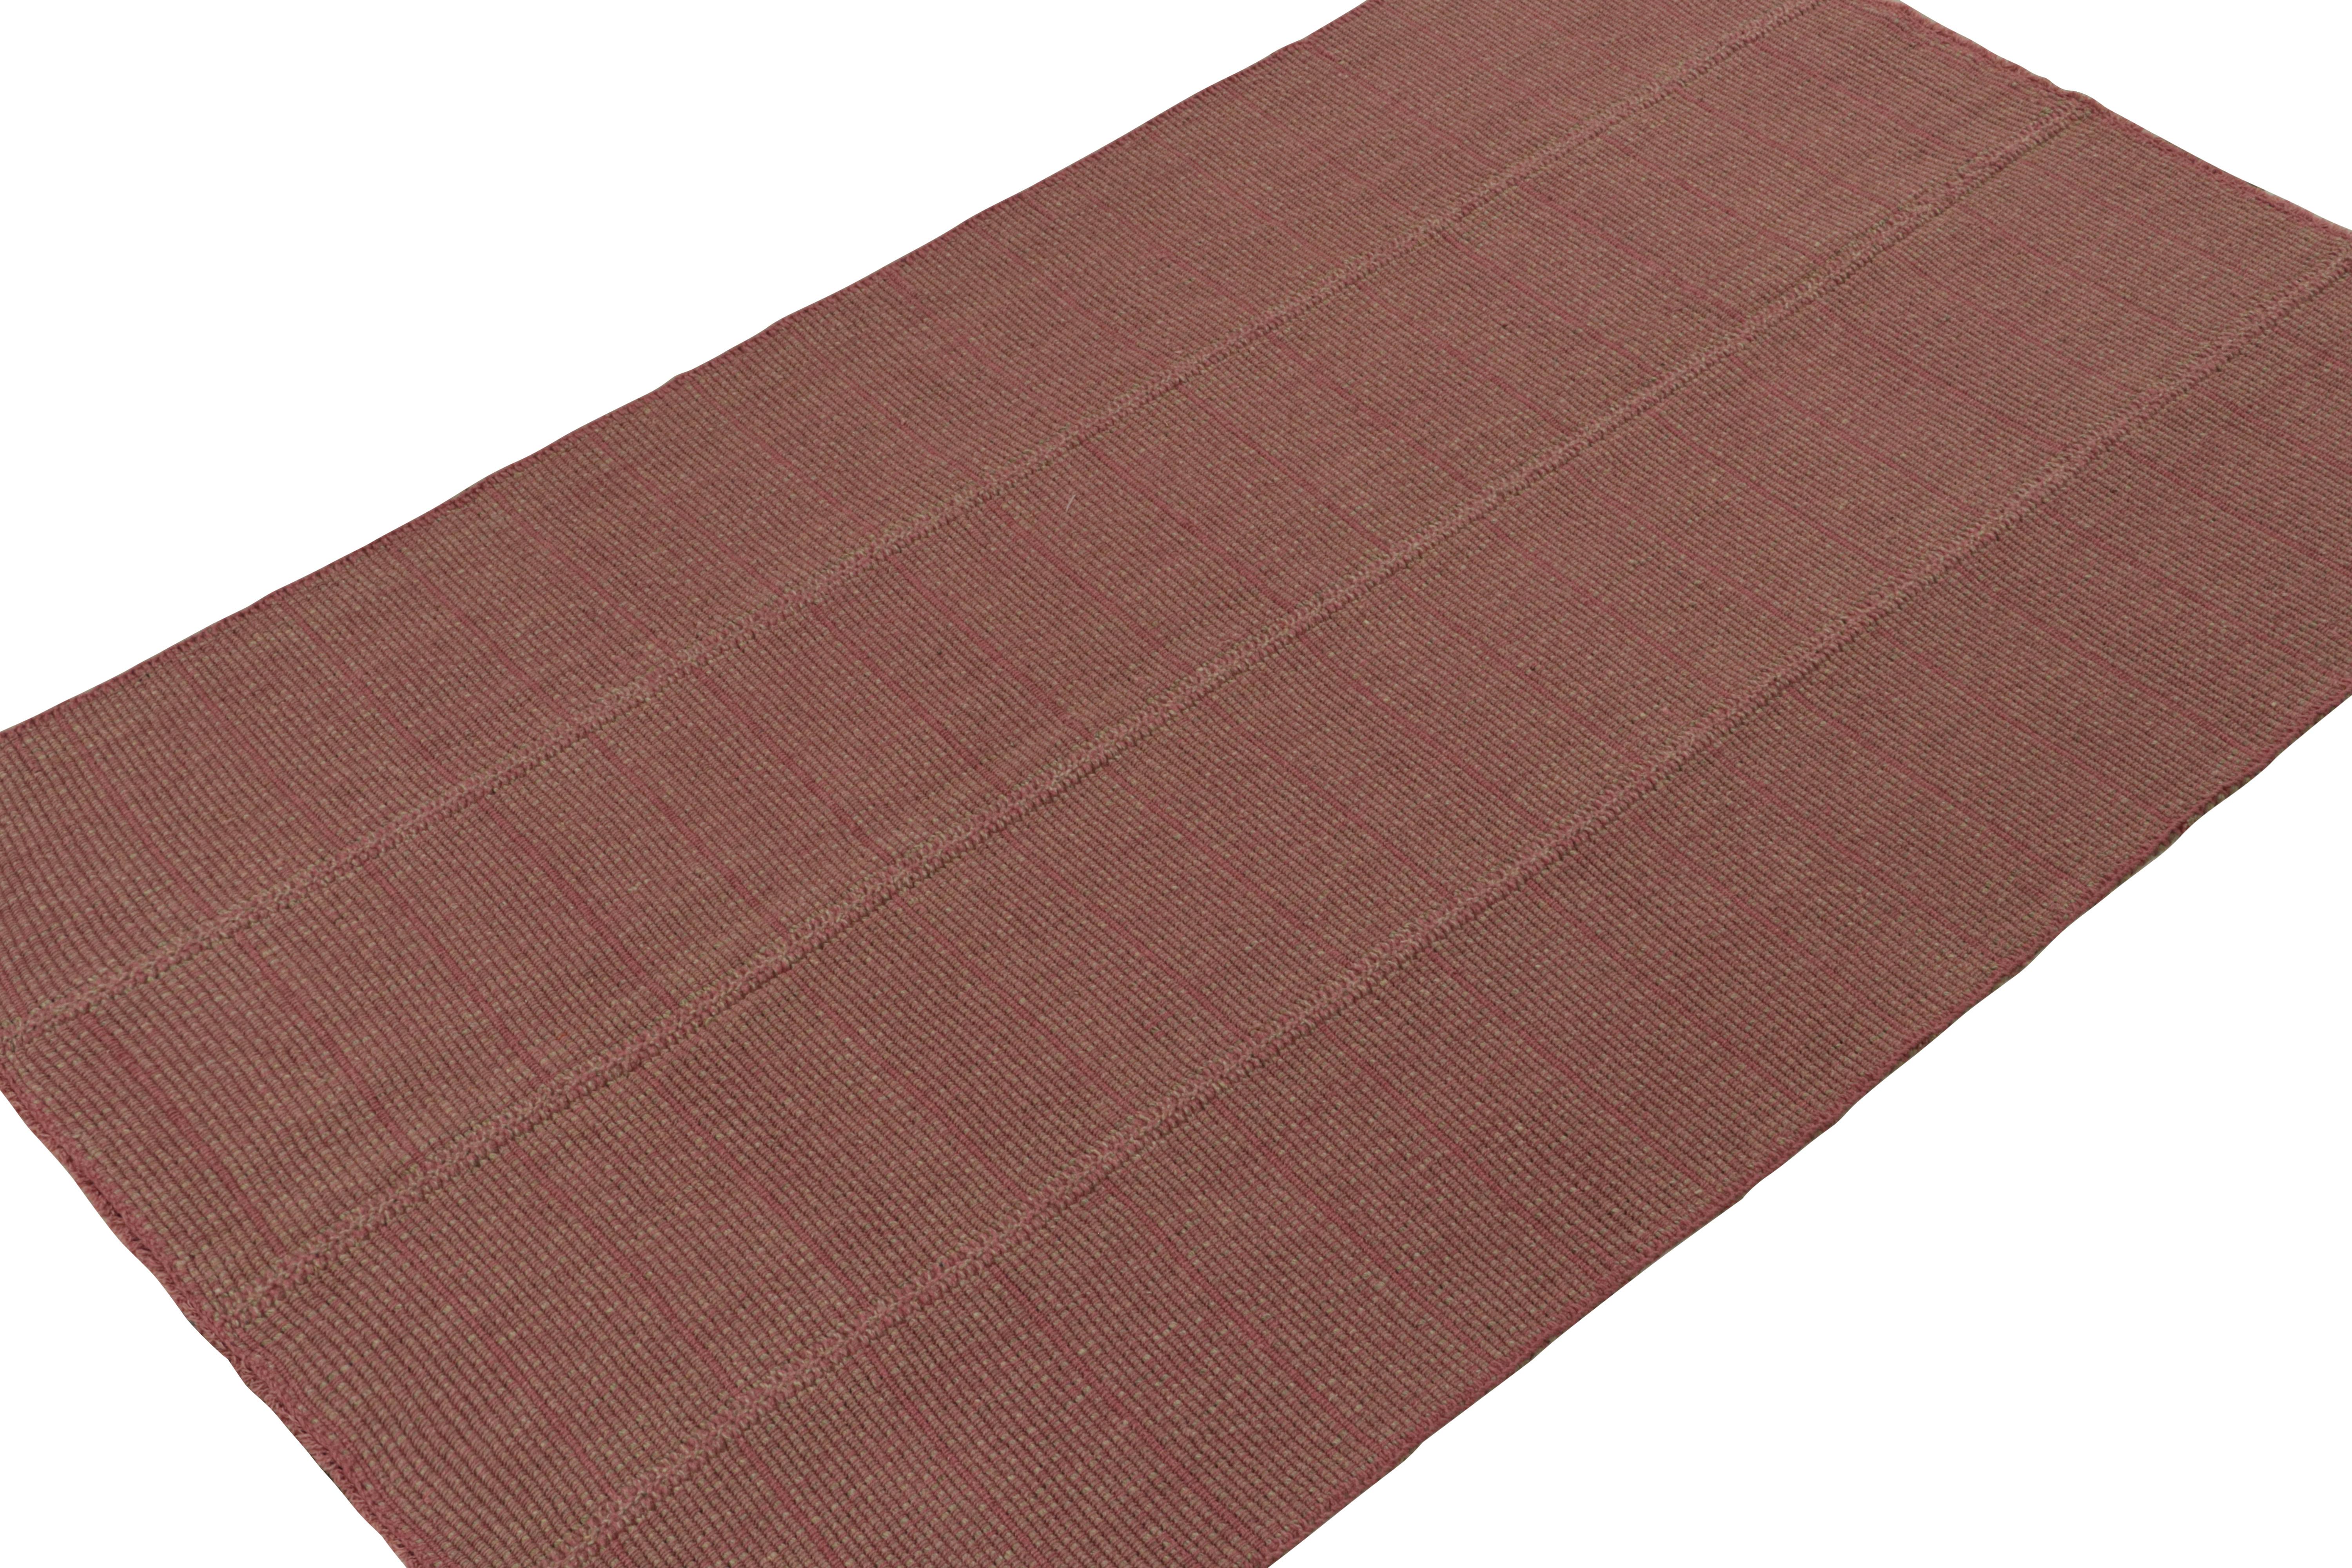 Handwoven in wool, a 6x9 Kilim from a bold new line of contemporary flatweaves by Rug & Kilim.

On the Design: 

Connoting a modern take on classic panel-weaving, our latest “Rez Kilim” enjoys stripes in tones of red. Keen eyes will admire how this